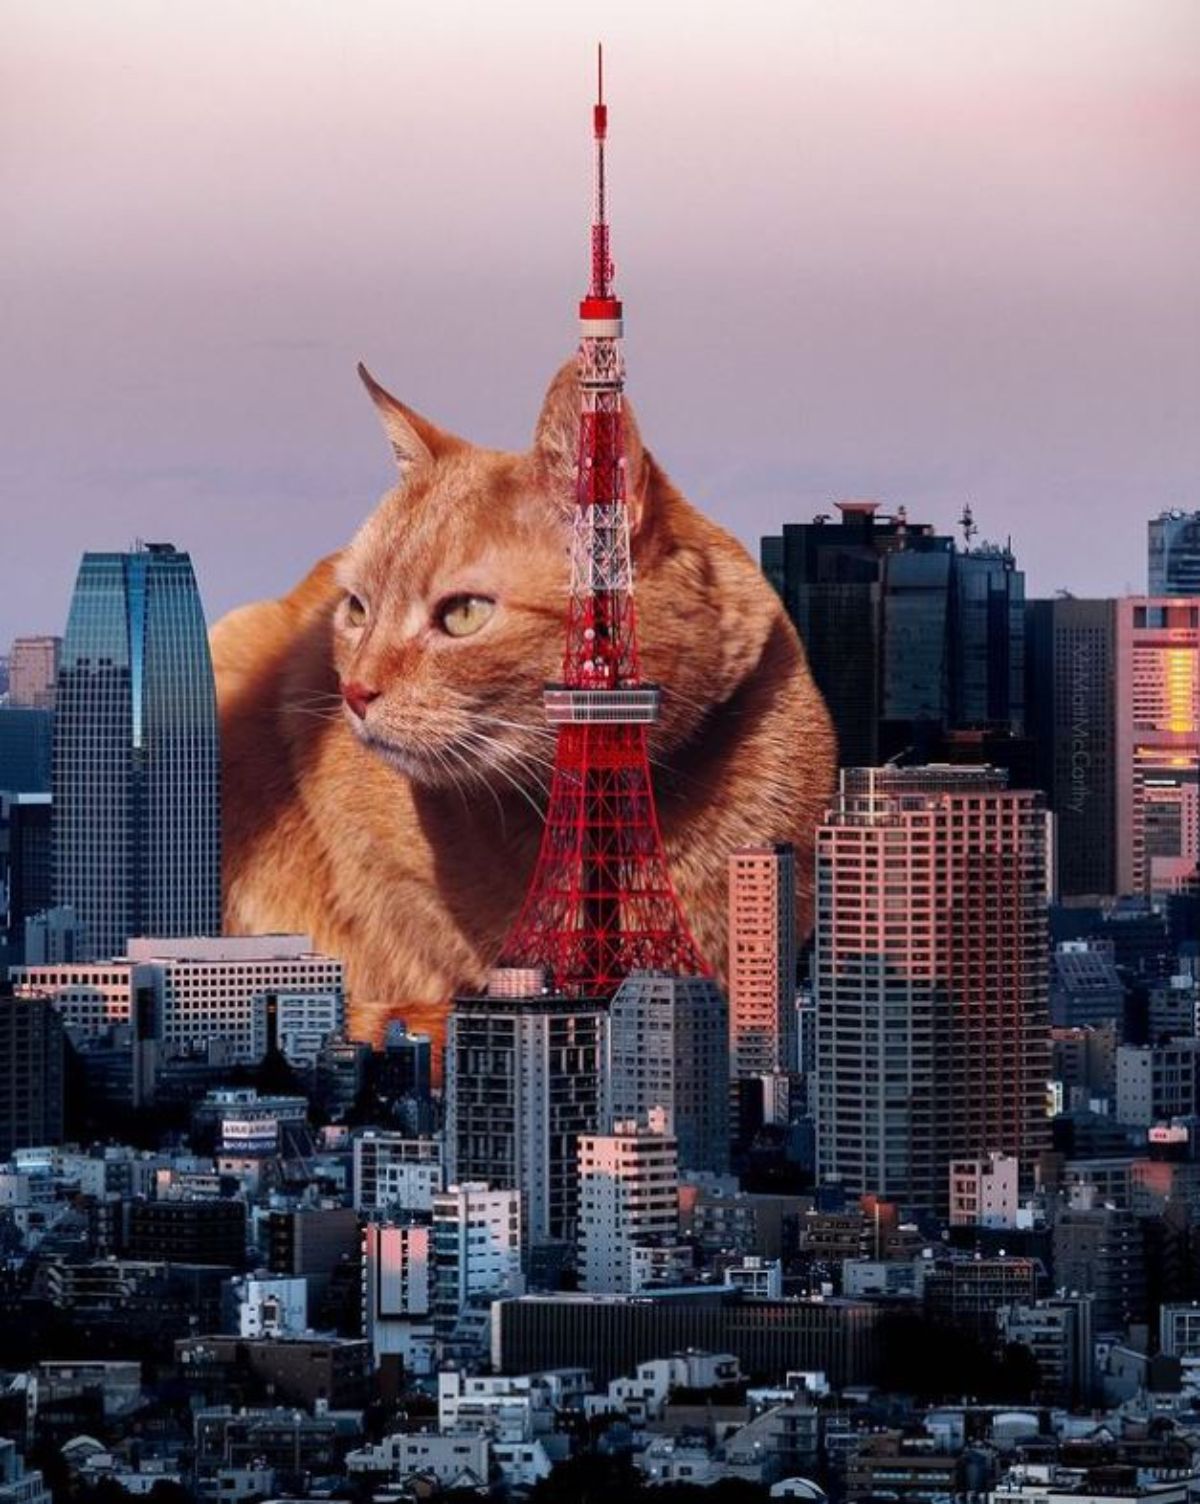 large photoshopped orange cat laying down in the middle of tall buildings